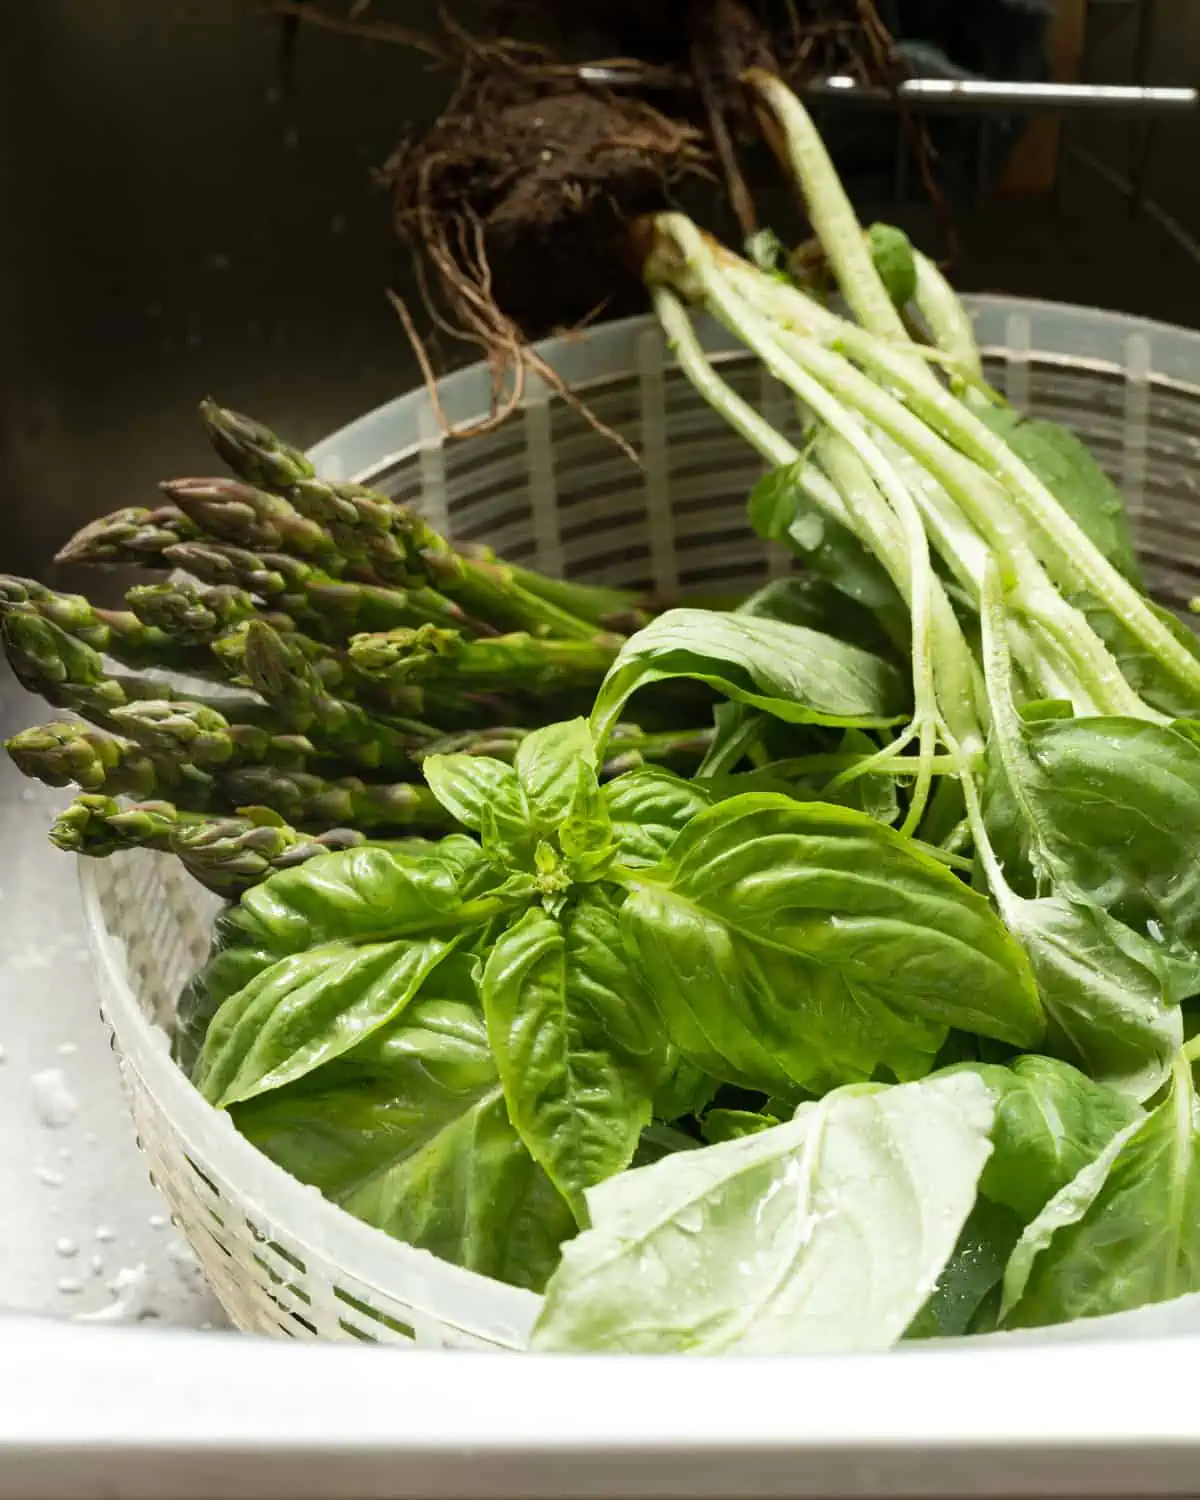 Fresh basil and asparagus in a strainer being washed.